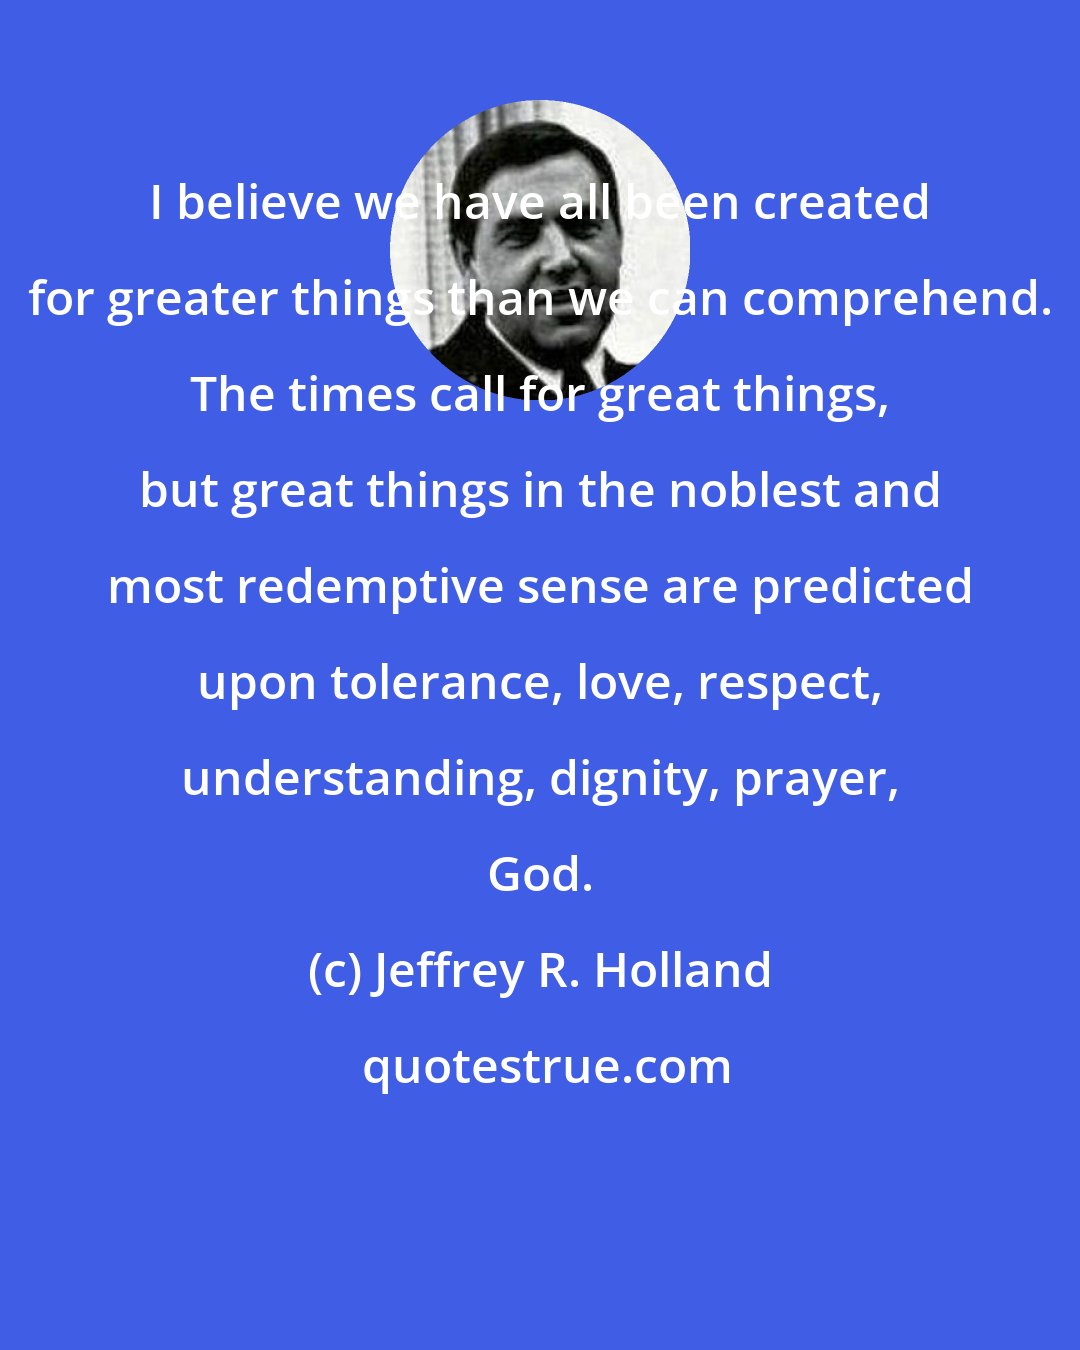 Jeffrey R. Holland: I believe we have all been created for greater things than we can comprehend. The times call for great things, but great things in the noblest and most redemptive sense are predicted upon tolerance, love, respect, understanding, dignity, prayer, God.